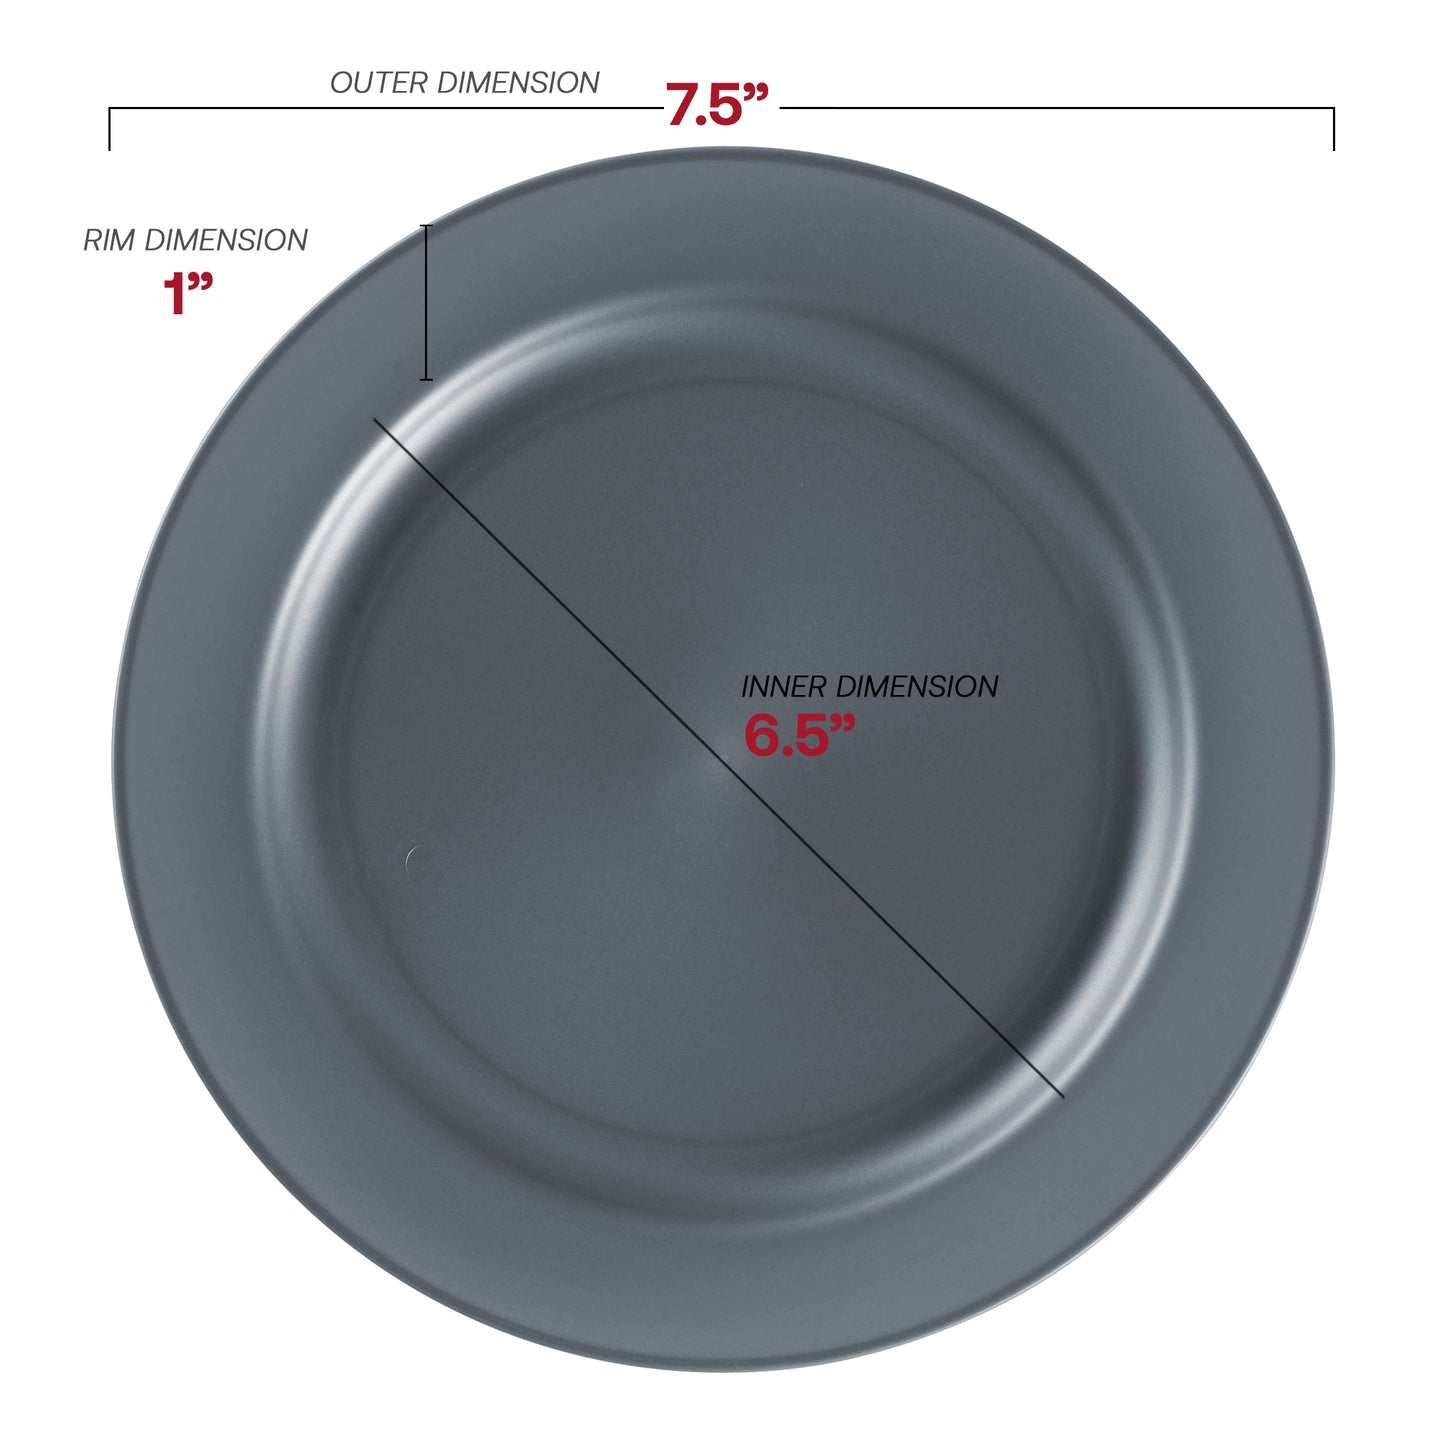 Matte Charcoal Gray Round Plastic Salad Plates (7.5") Dimension | The Kaya Collection